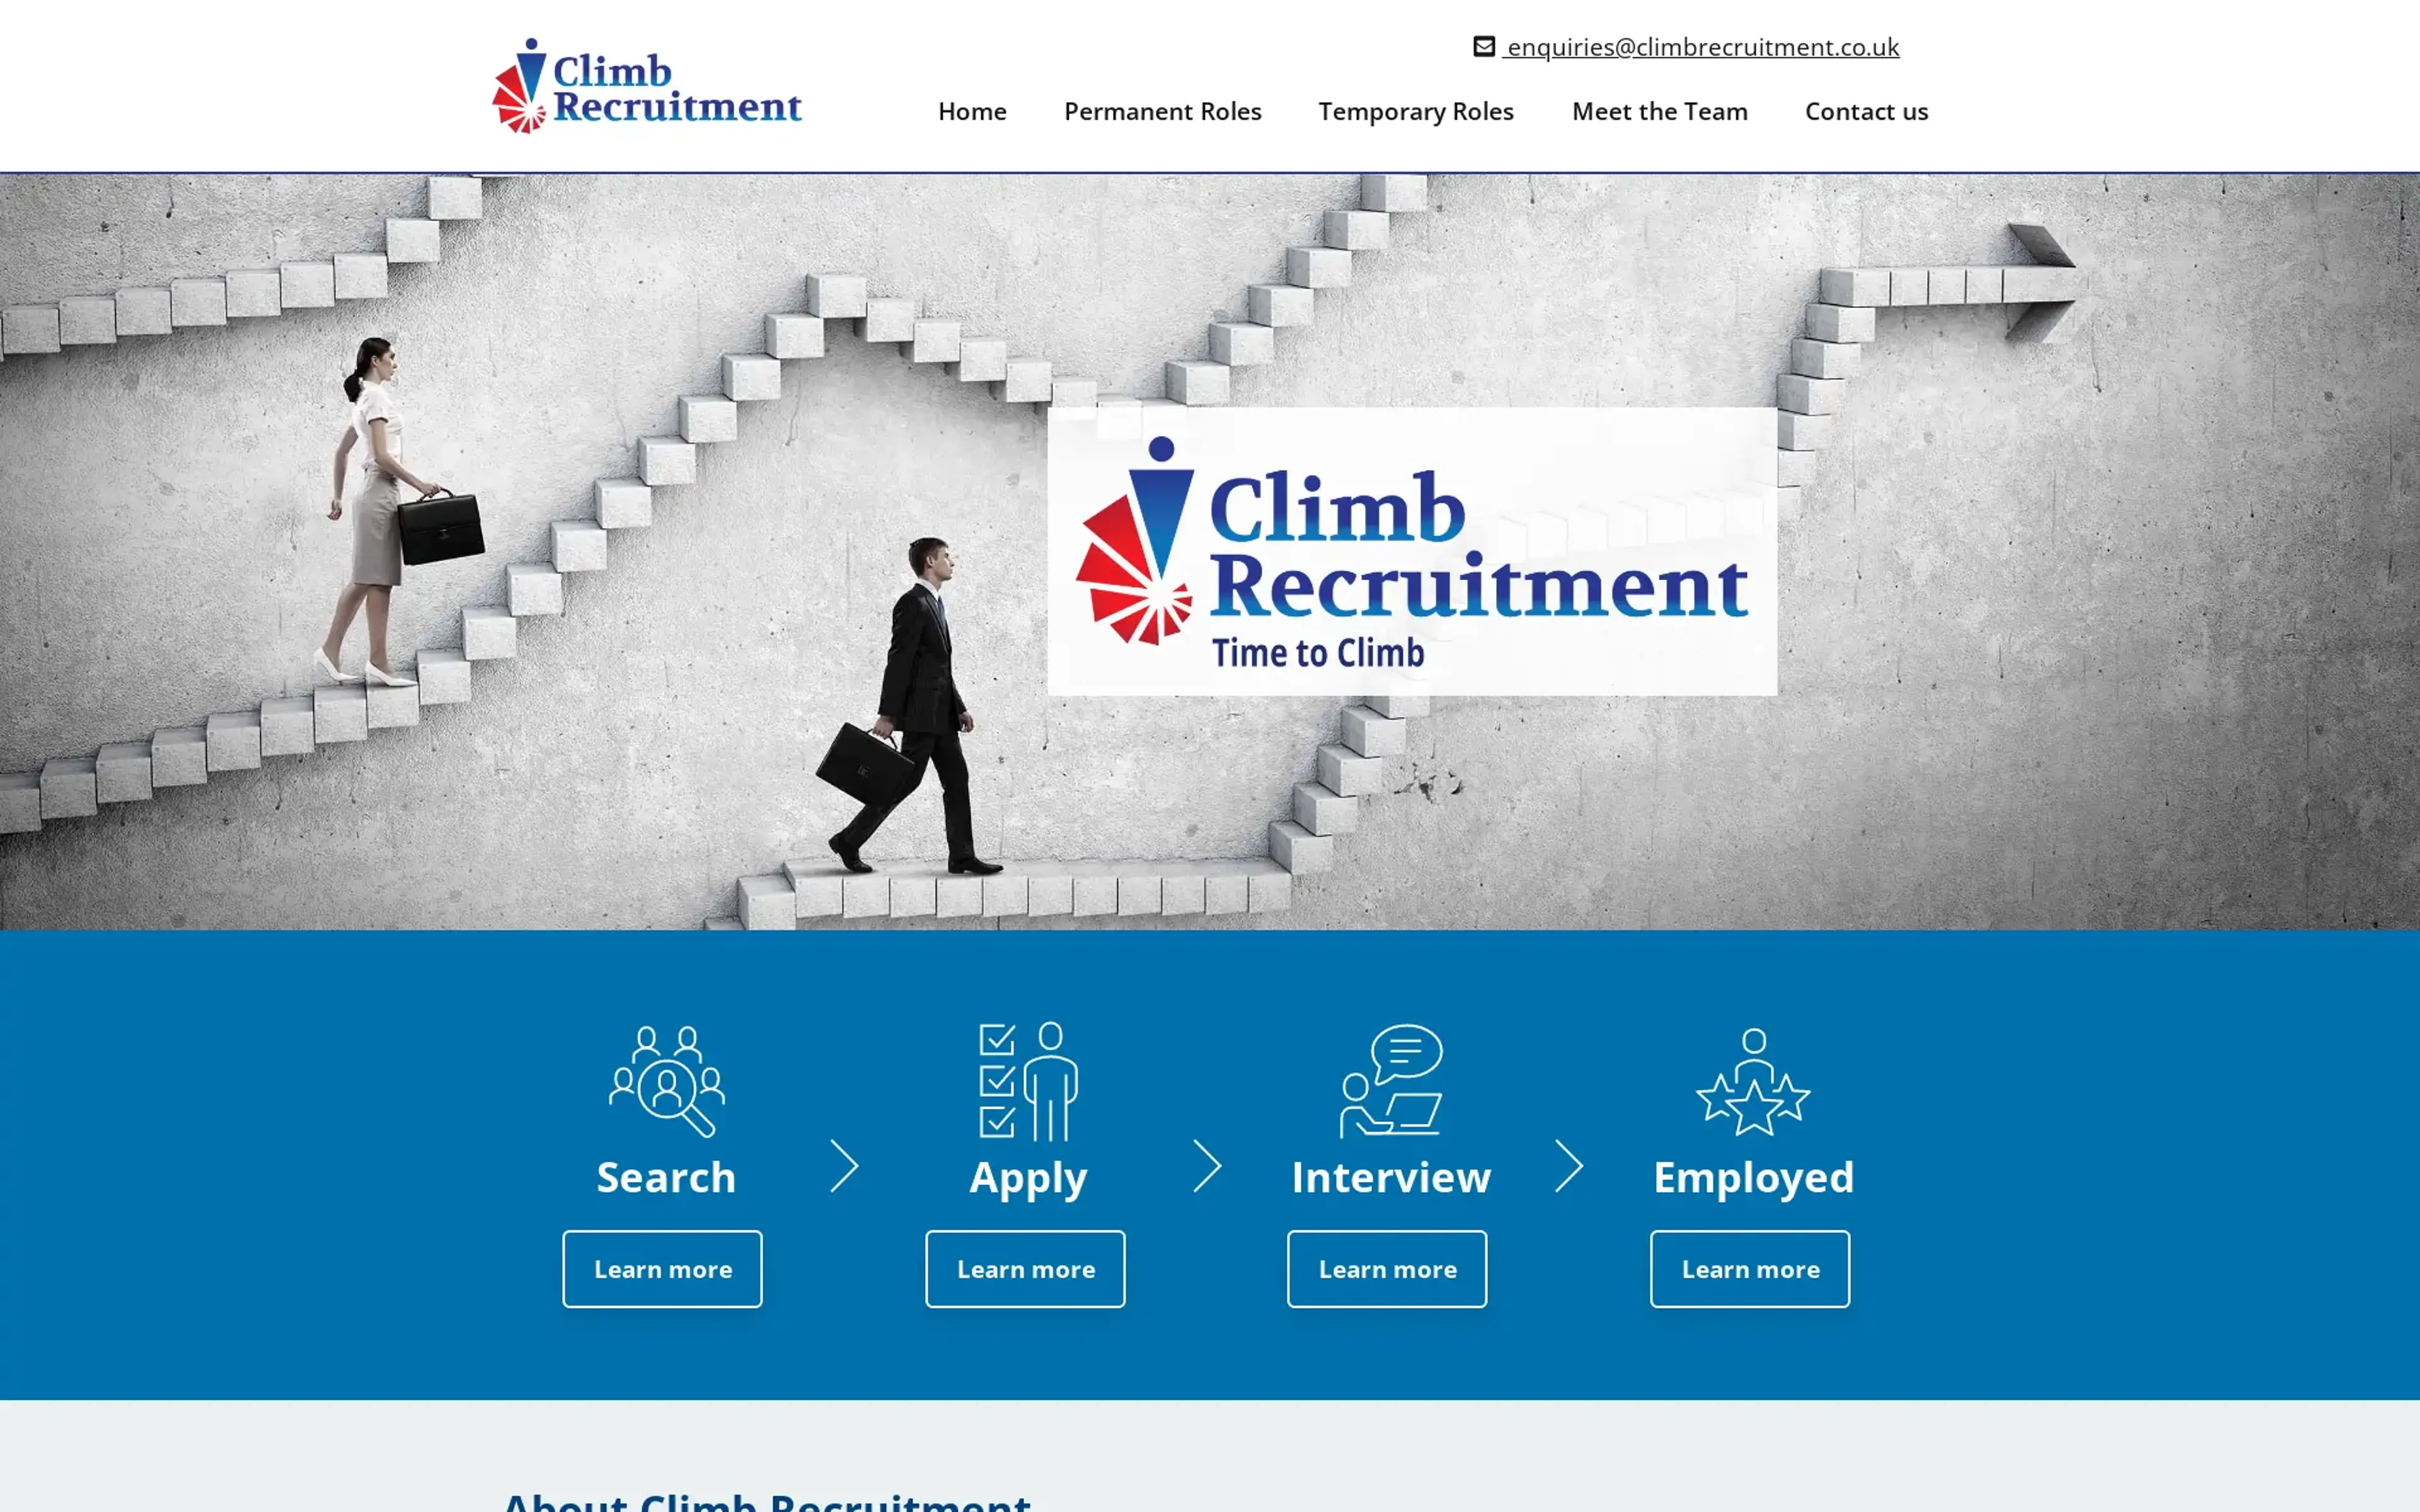 Recent project we worked on for Climb Recruitment